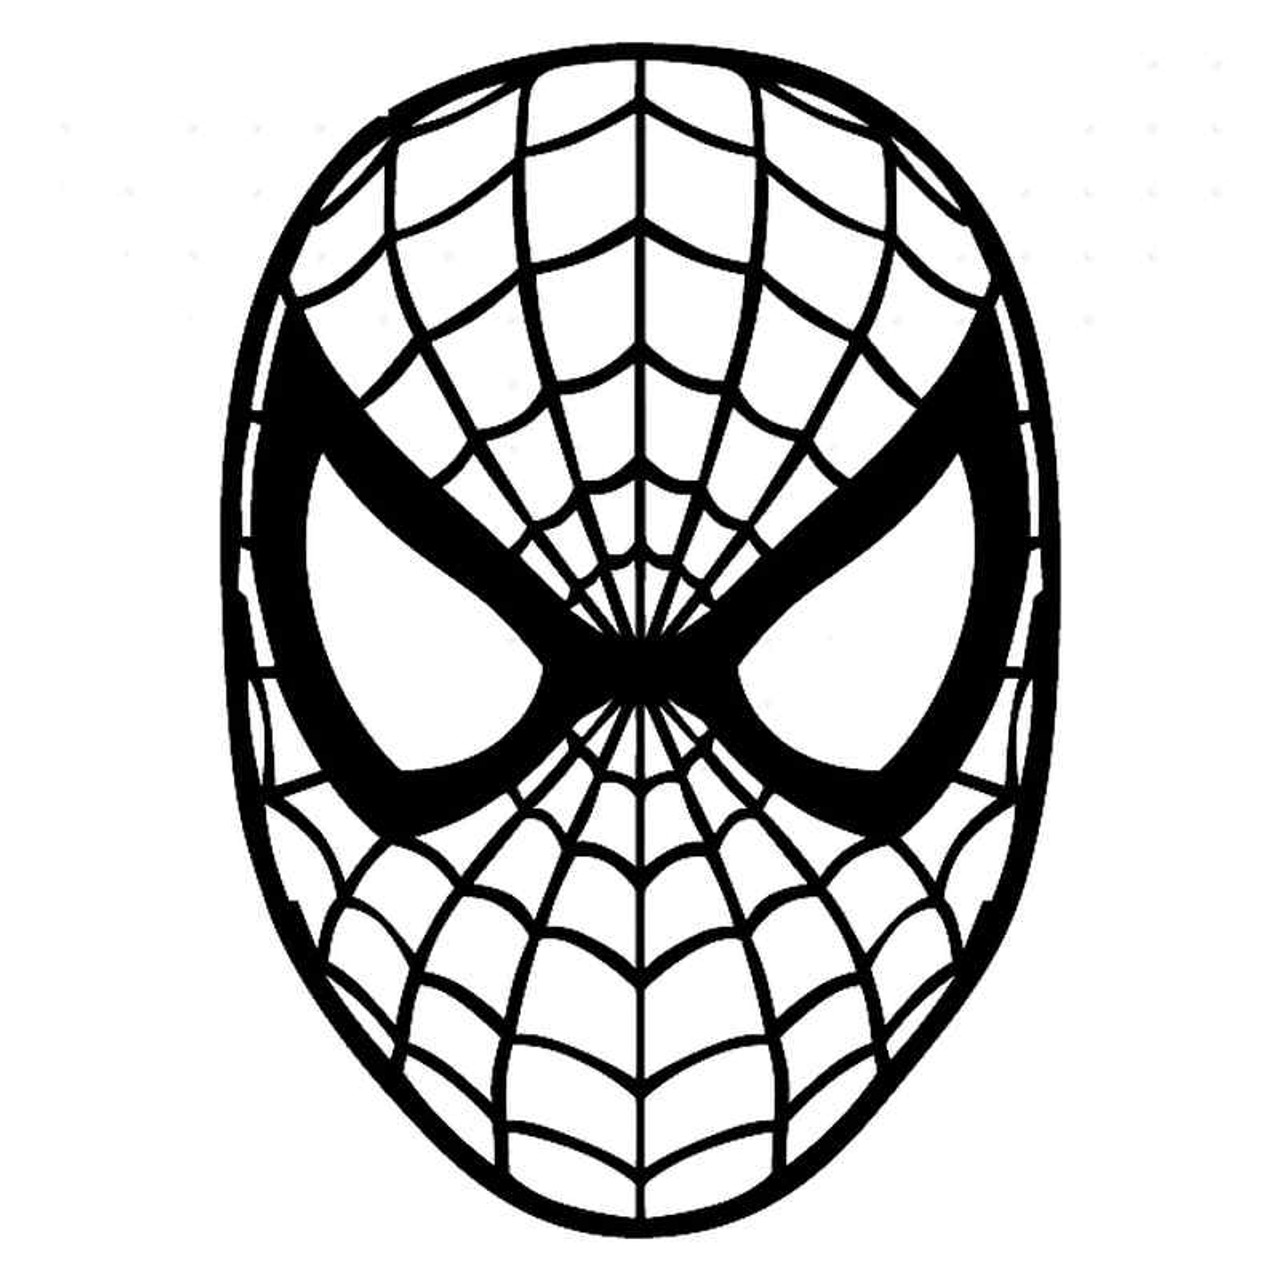 Outlined Spiderman Face Vinyl Decal Sticker 16112